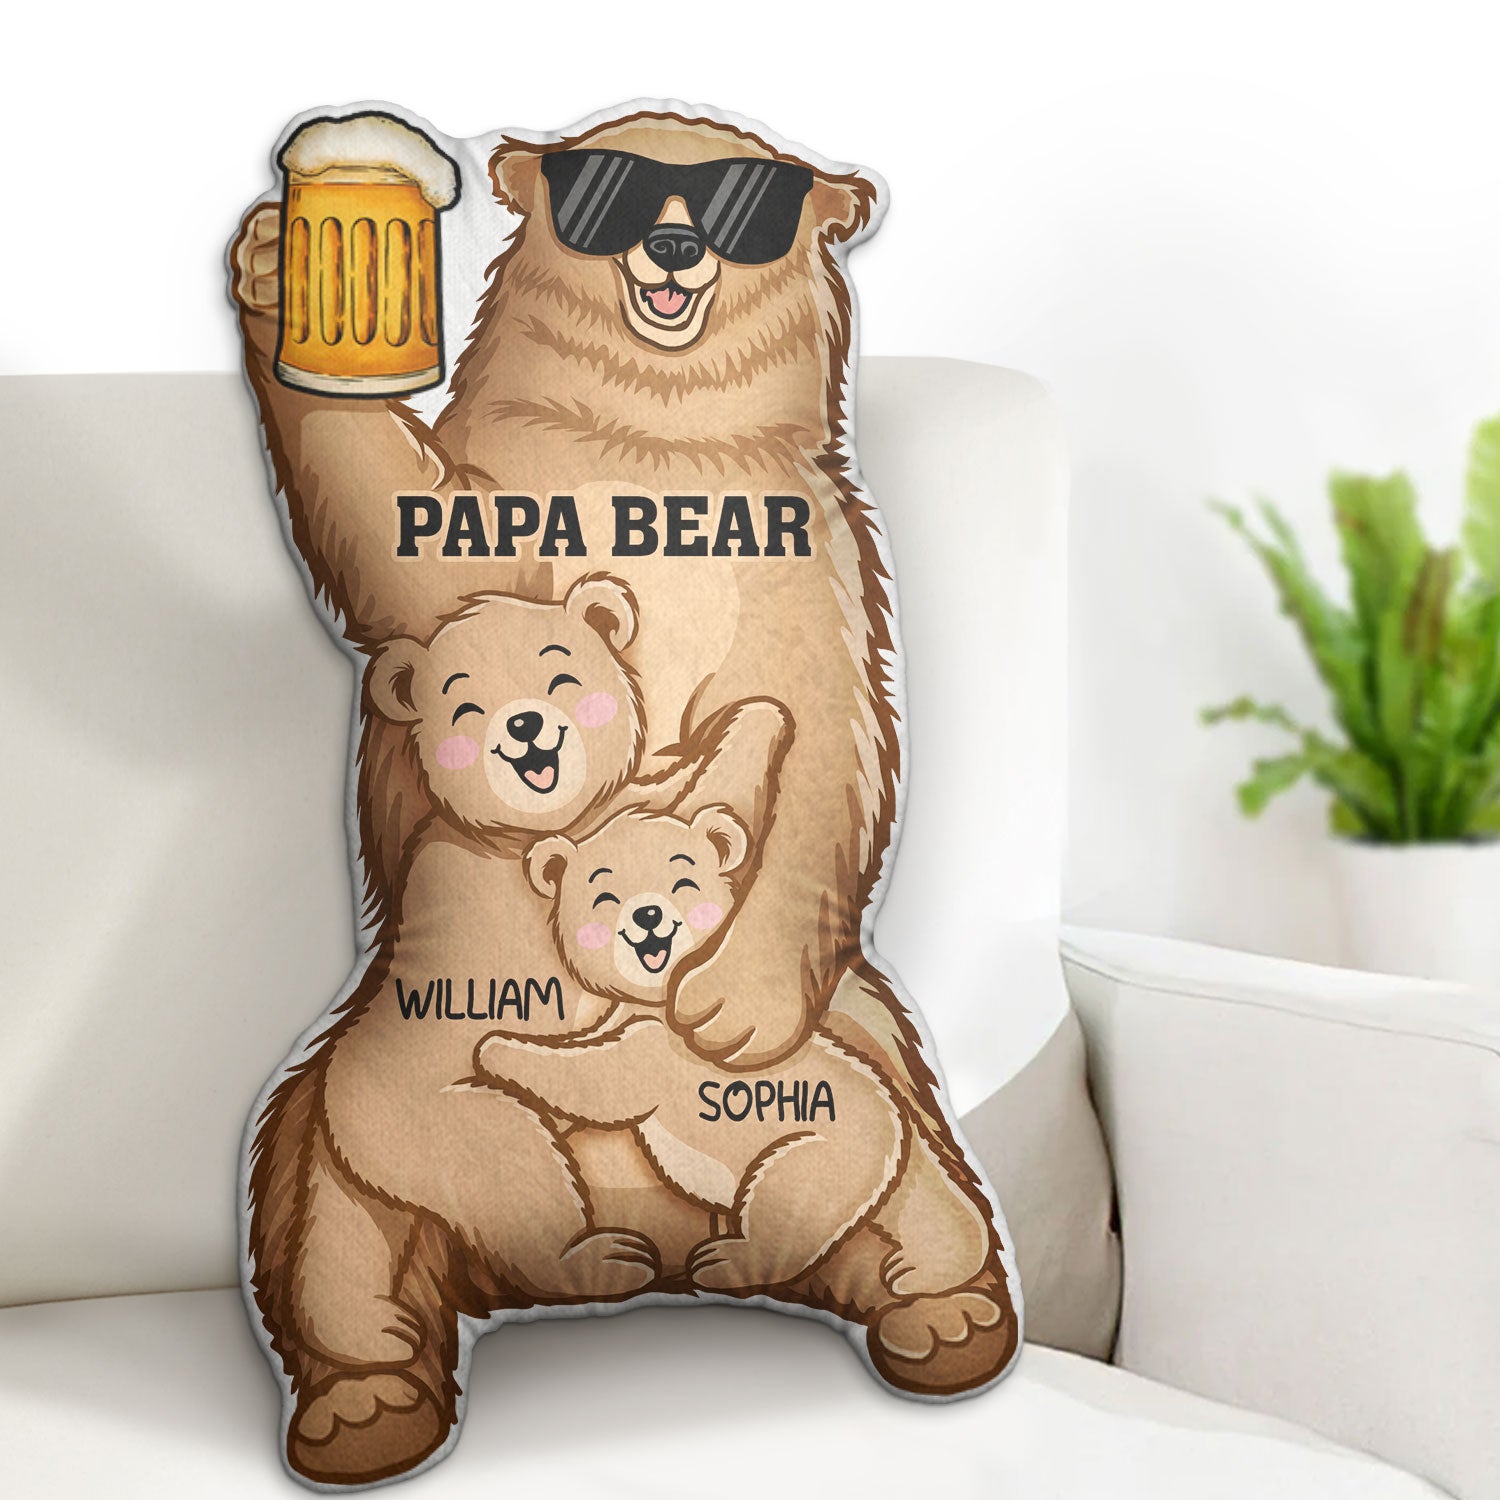 Papa Bear - Gift For Fathers - Personalized Custom Shaped Pillow